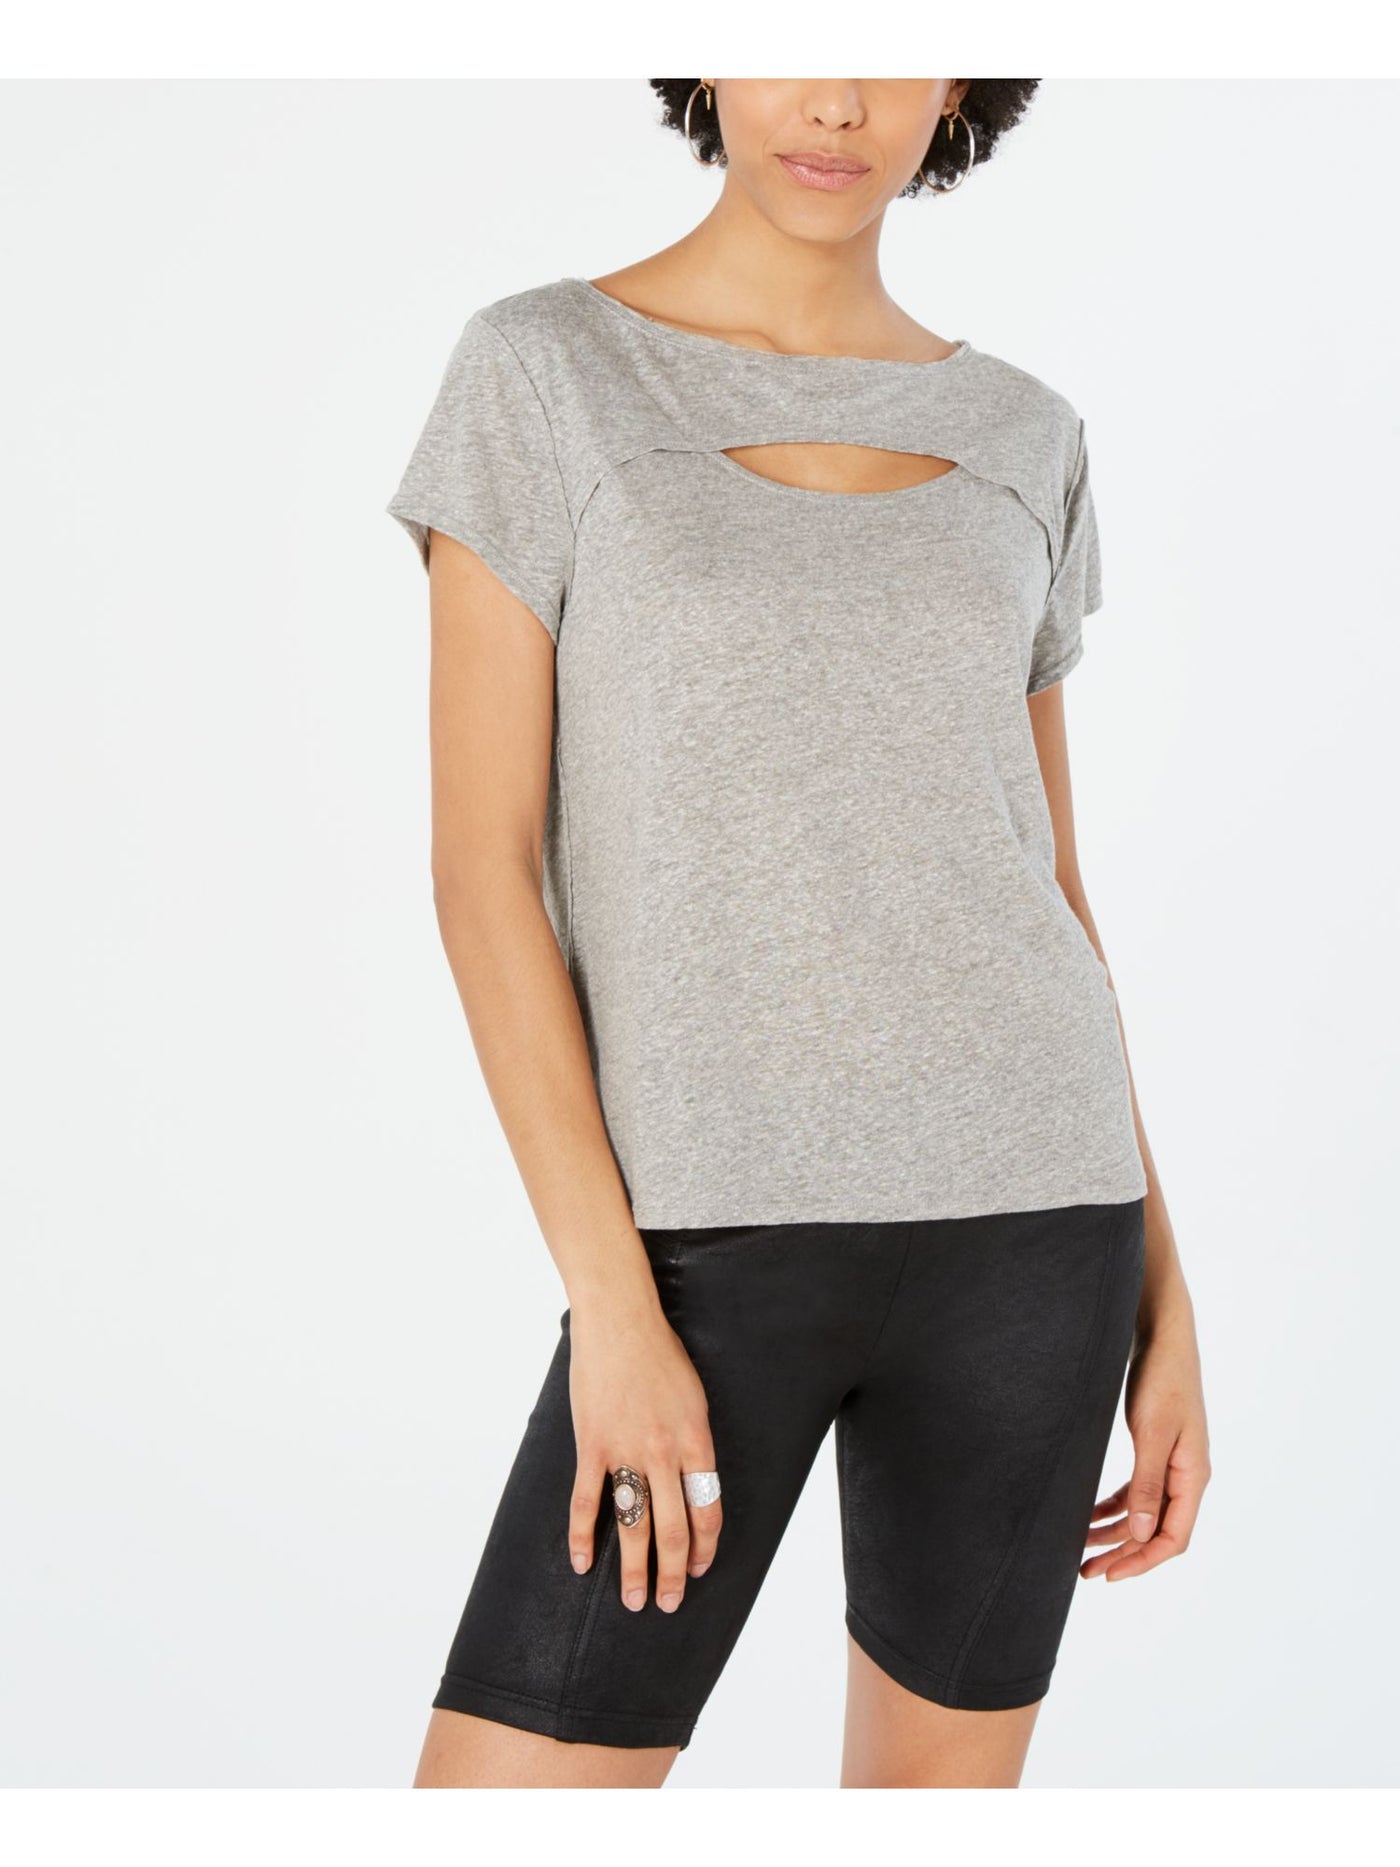 FREE PEOPLE Womens Gray Cut Out Heather Short Sleeve Crew Neck T-Shirt L